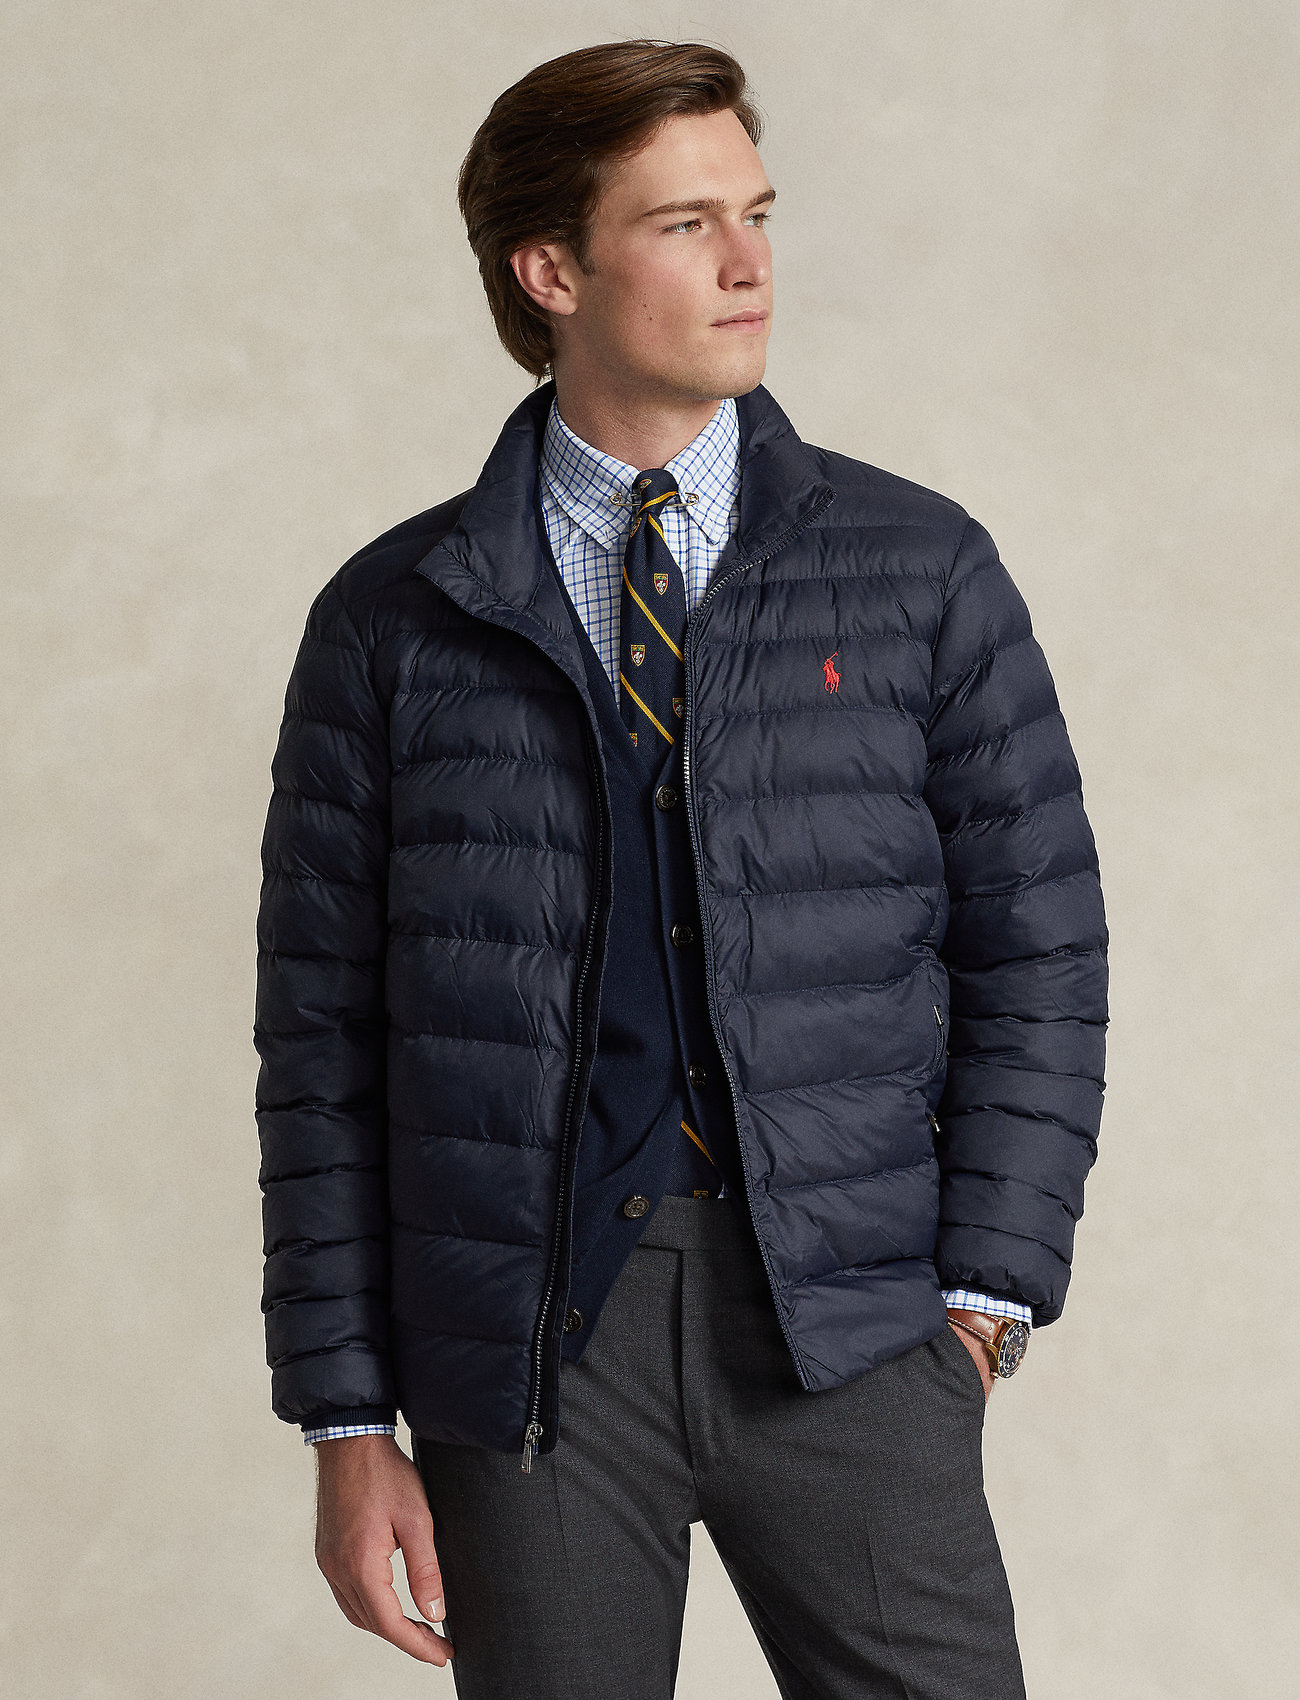 Polo Ralph Lauren - The Packable Jacket - kurtki puchowe - collection navy - 0